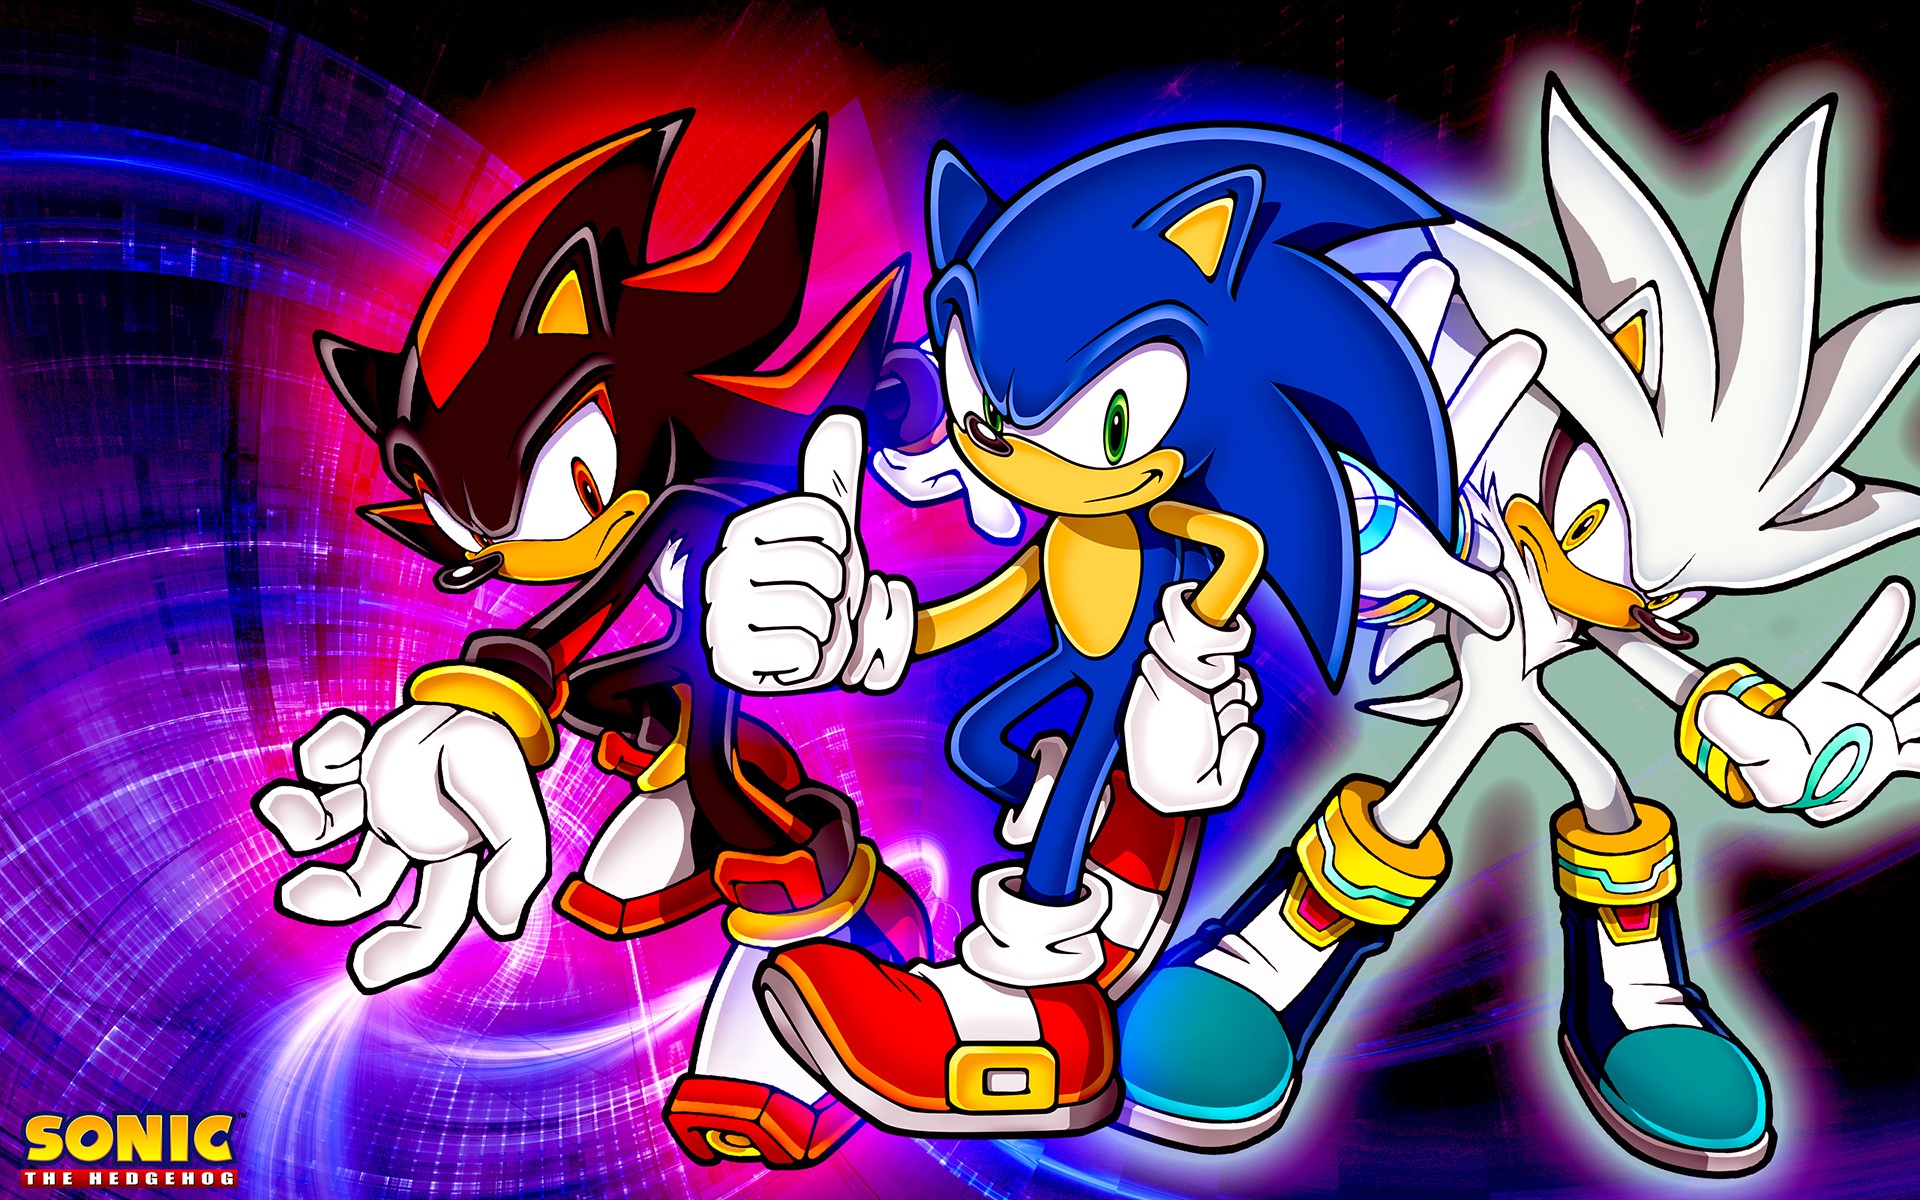 100+] Sonic And Silver Wallpapers